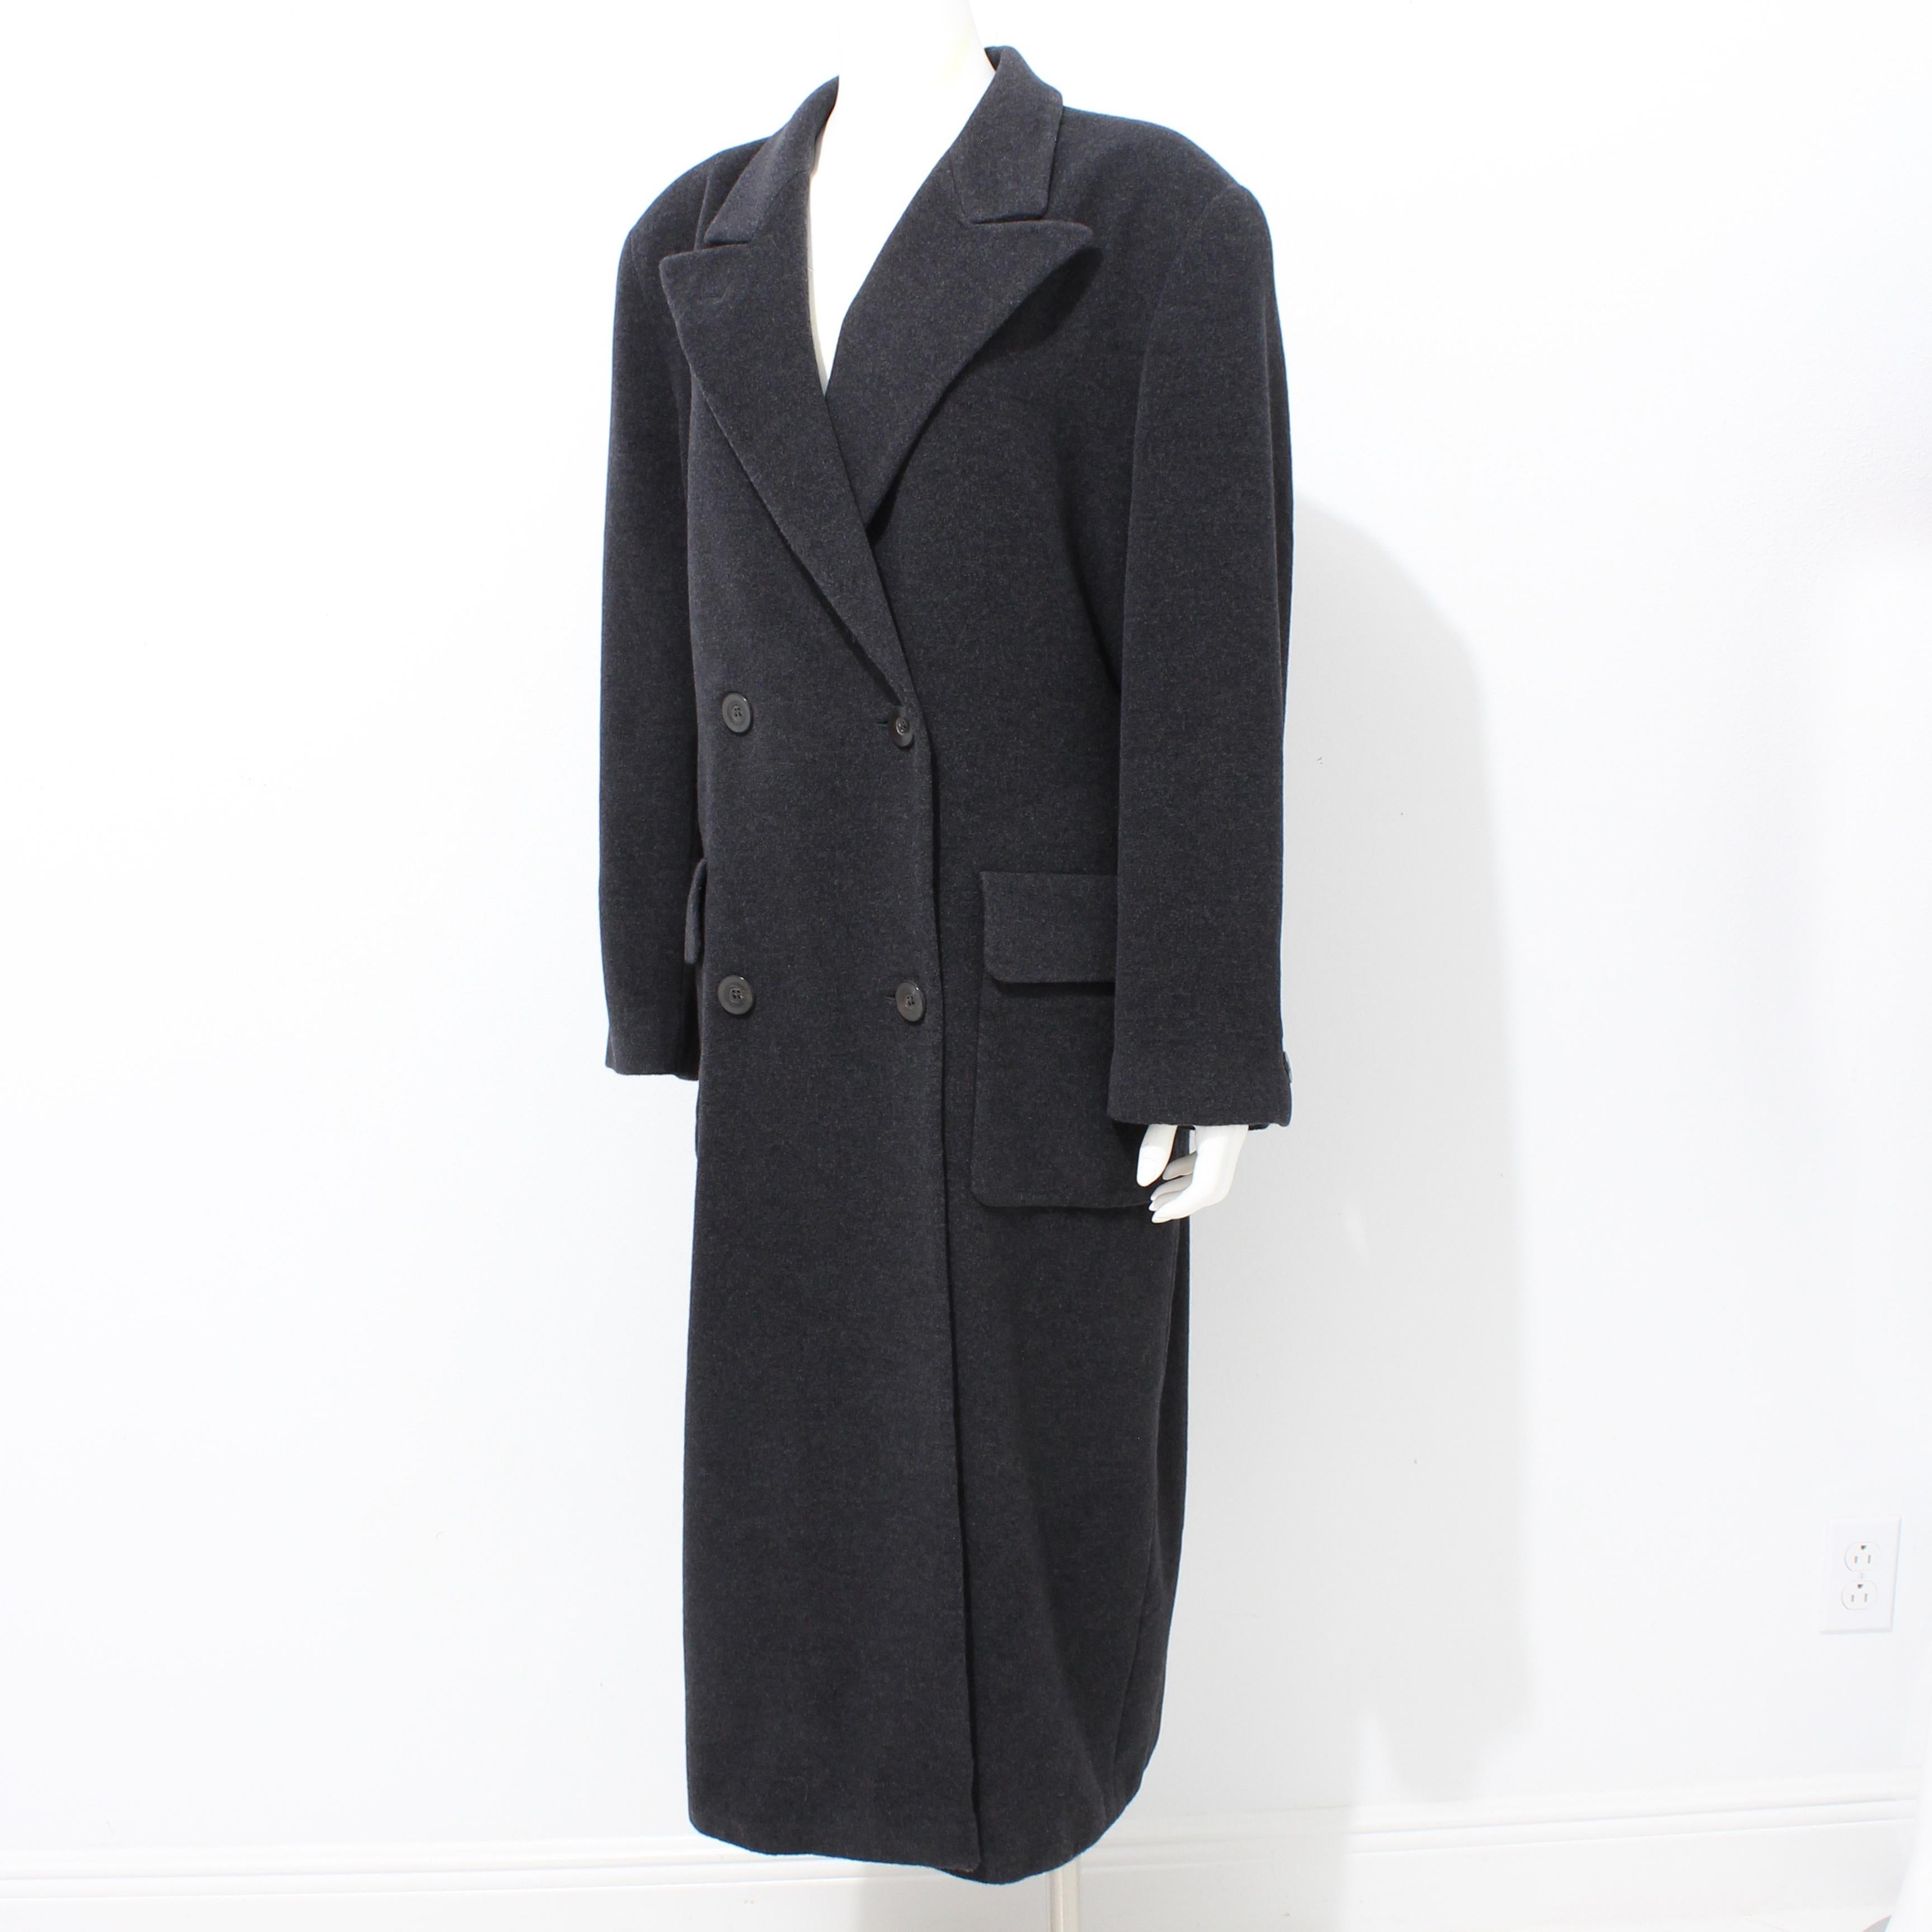 Escada Coat Double Breasted Charcoal Gray Pure New Wool Trench Style Vintage M/L For Sale 2